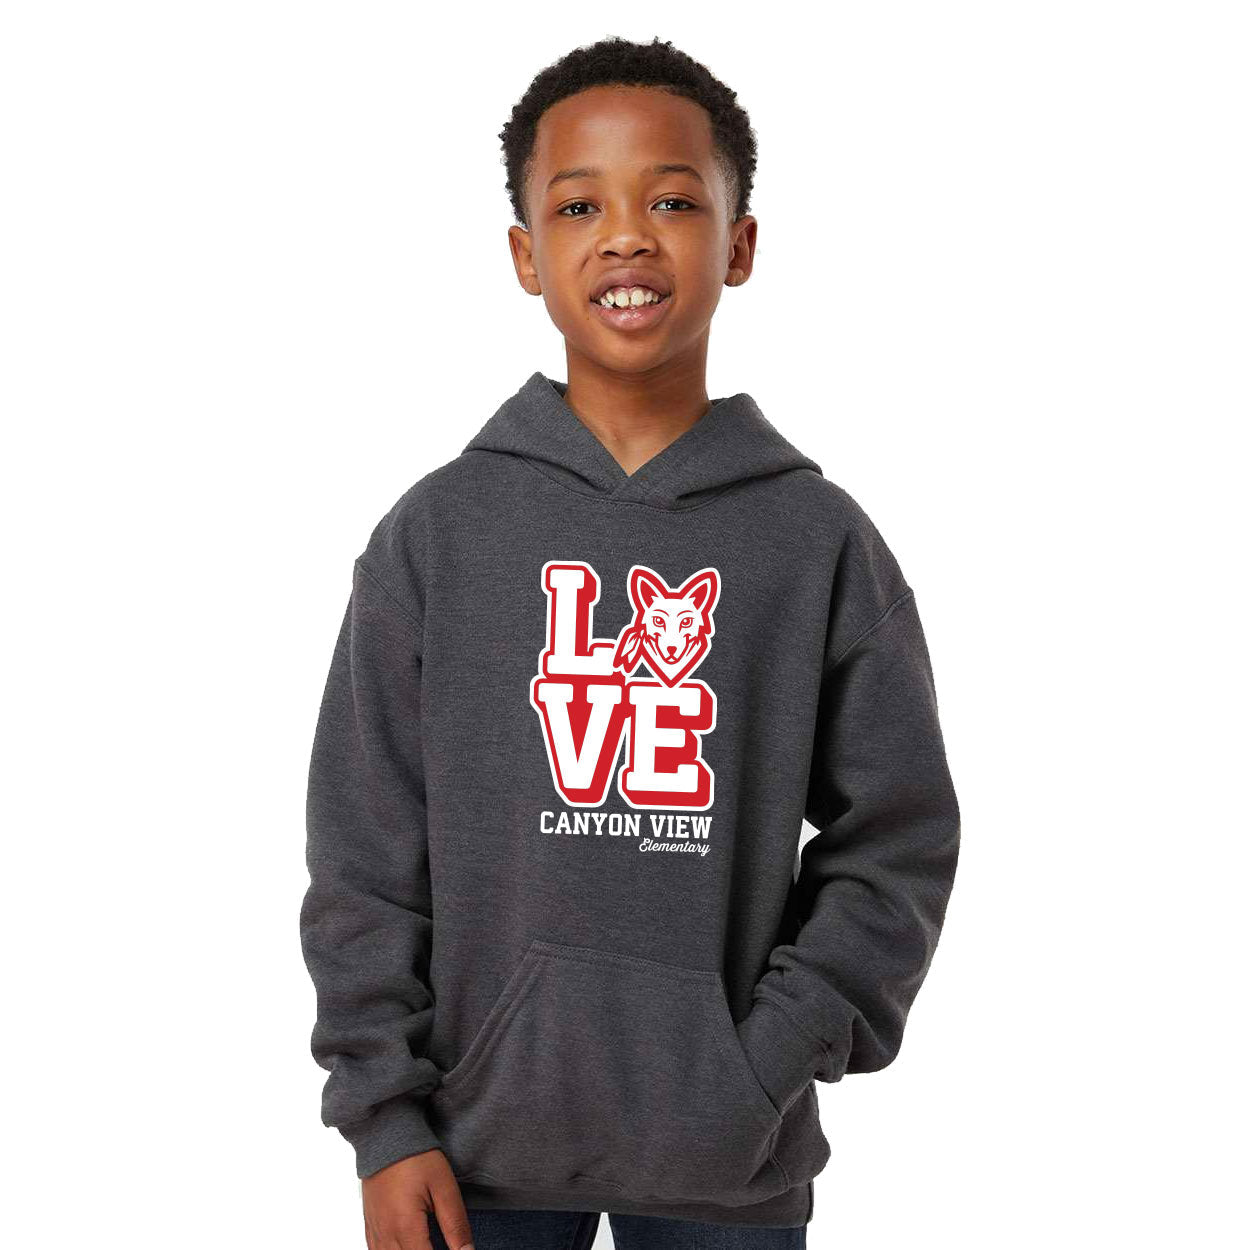 CANYON VIEW LOVE DESIGN YOUTH HOODED SWEATSHIRT